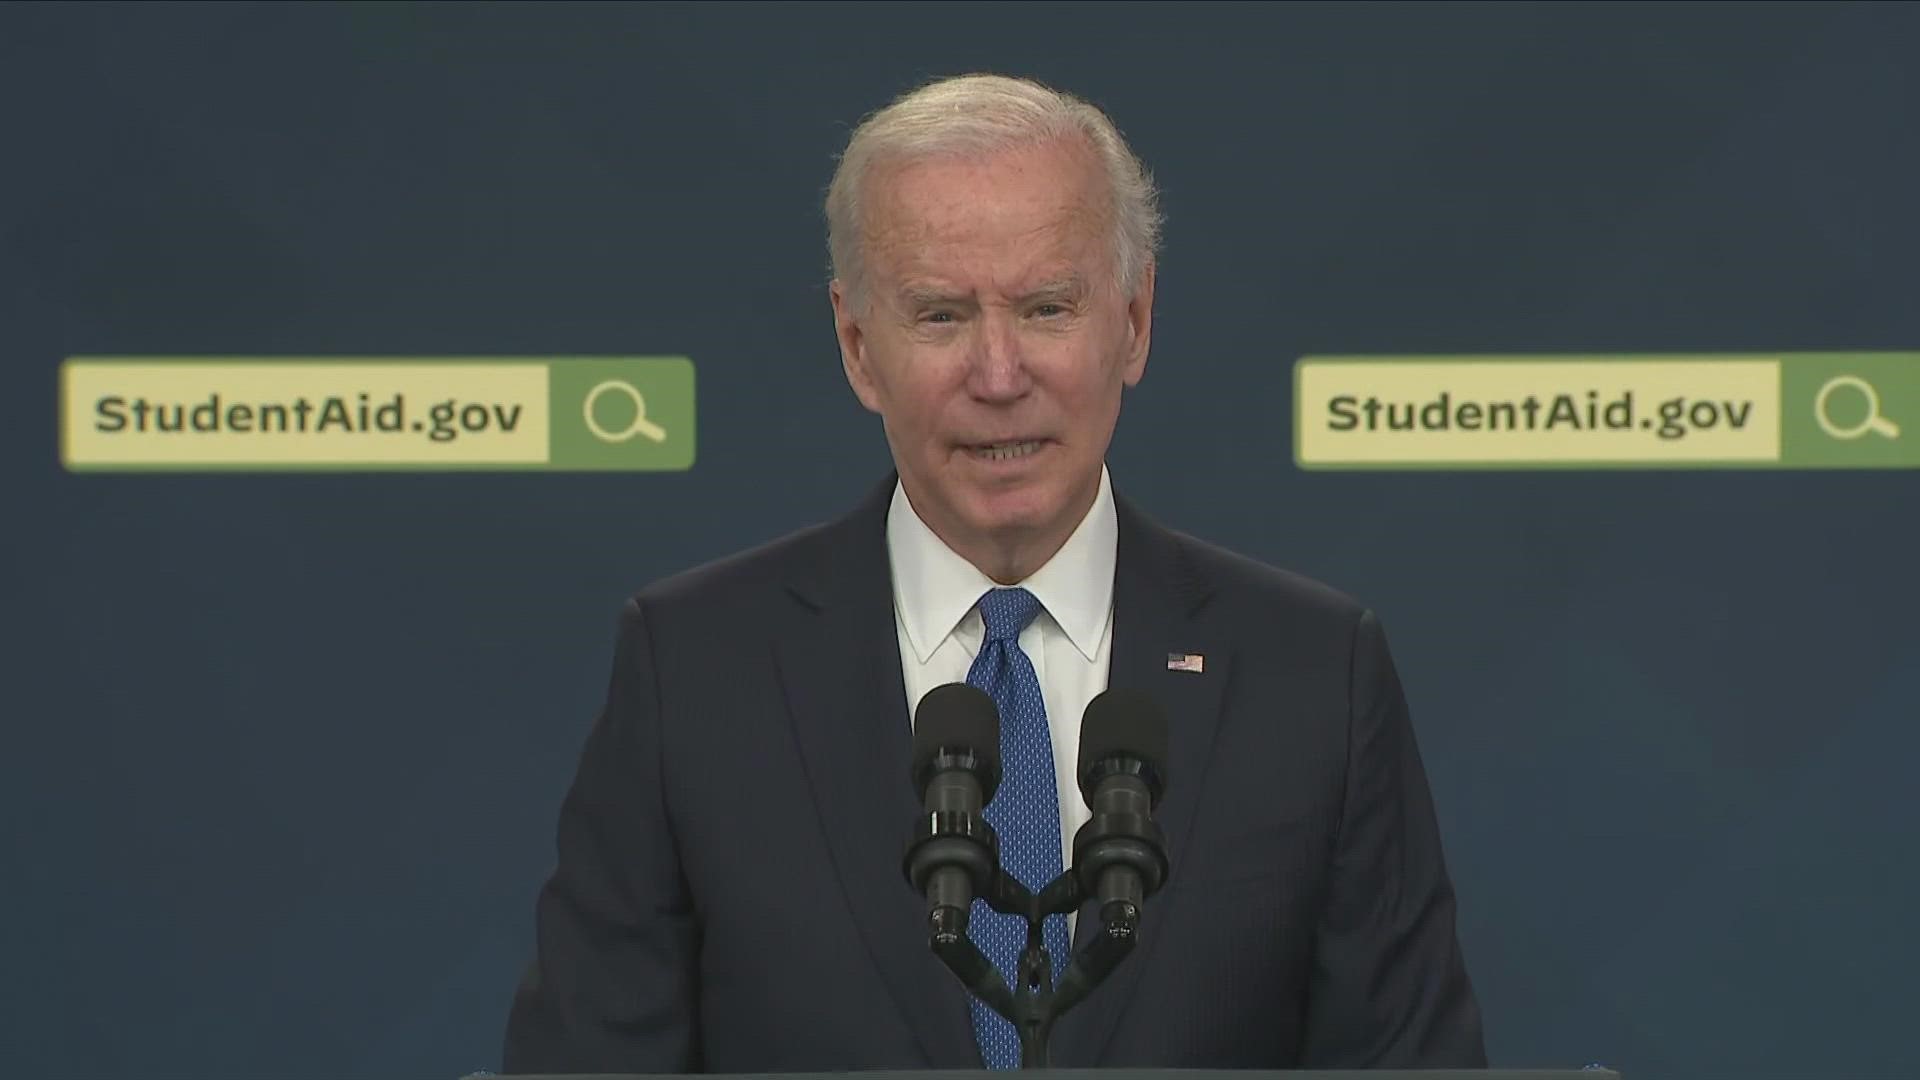 More than 8 million applications were submitted over the weekend during the first days of the student loan relief program's beta launch, Biden said Monday.